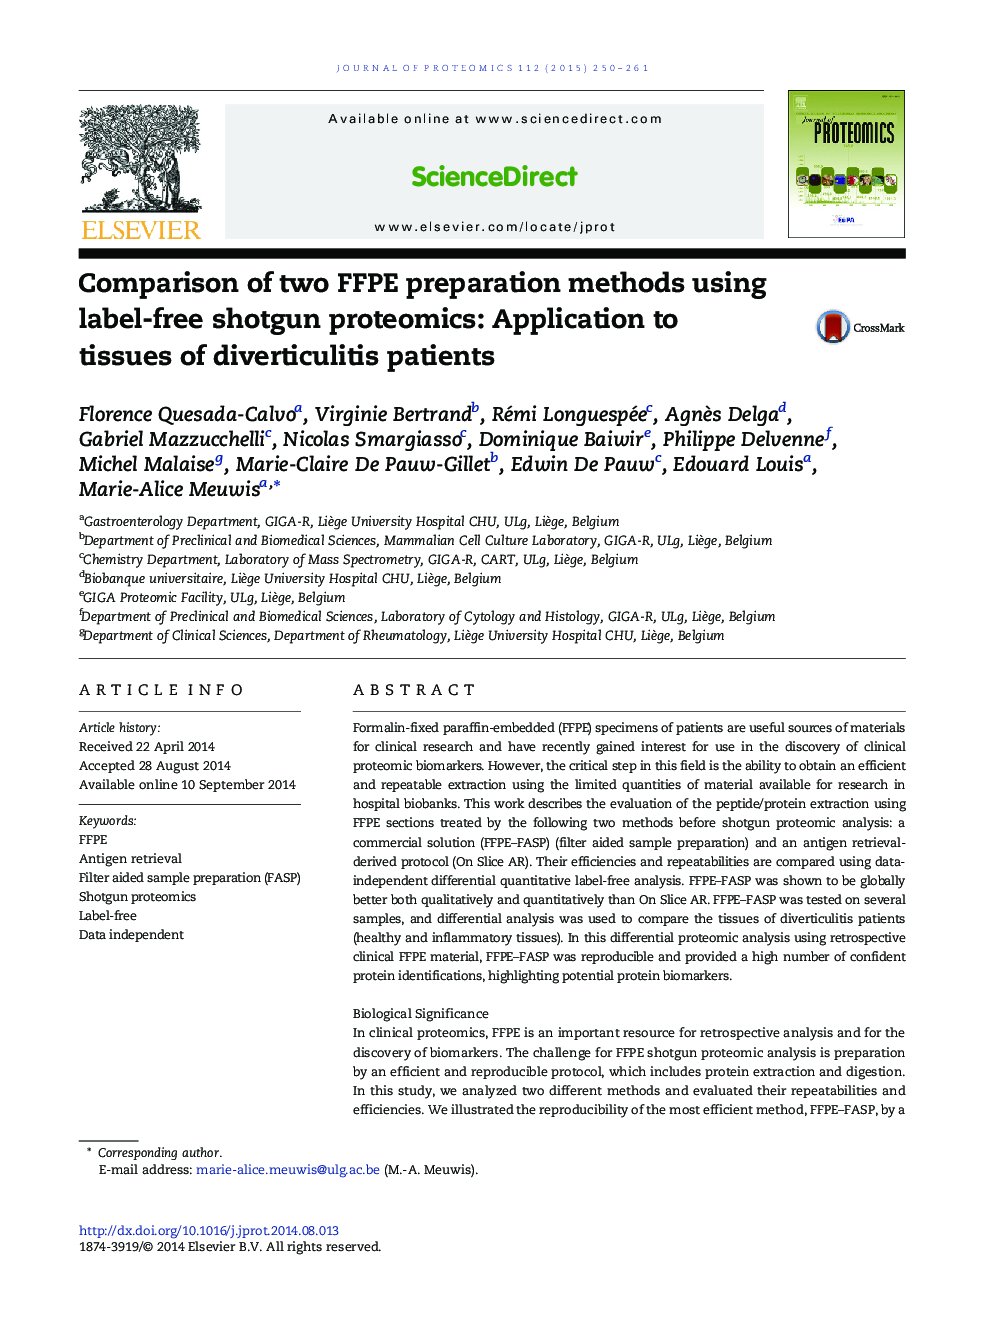 Comparison of two FFPE preparation methods using label-free shotgun proteomics: Application to tissues of diverticulitis patients